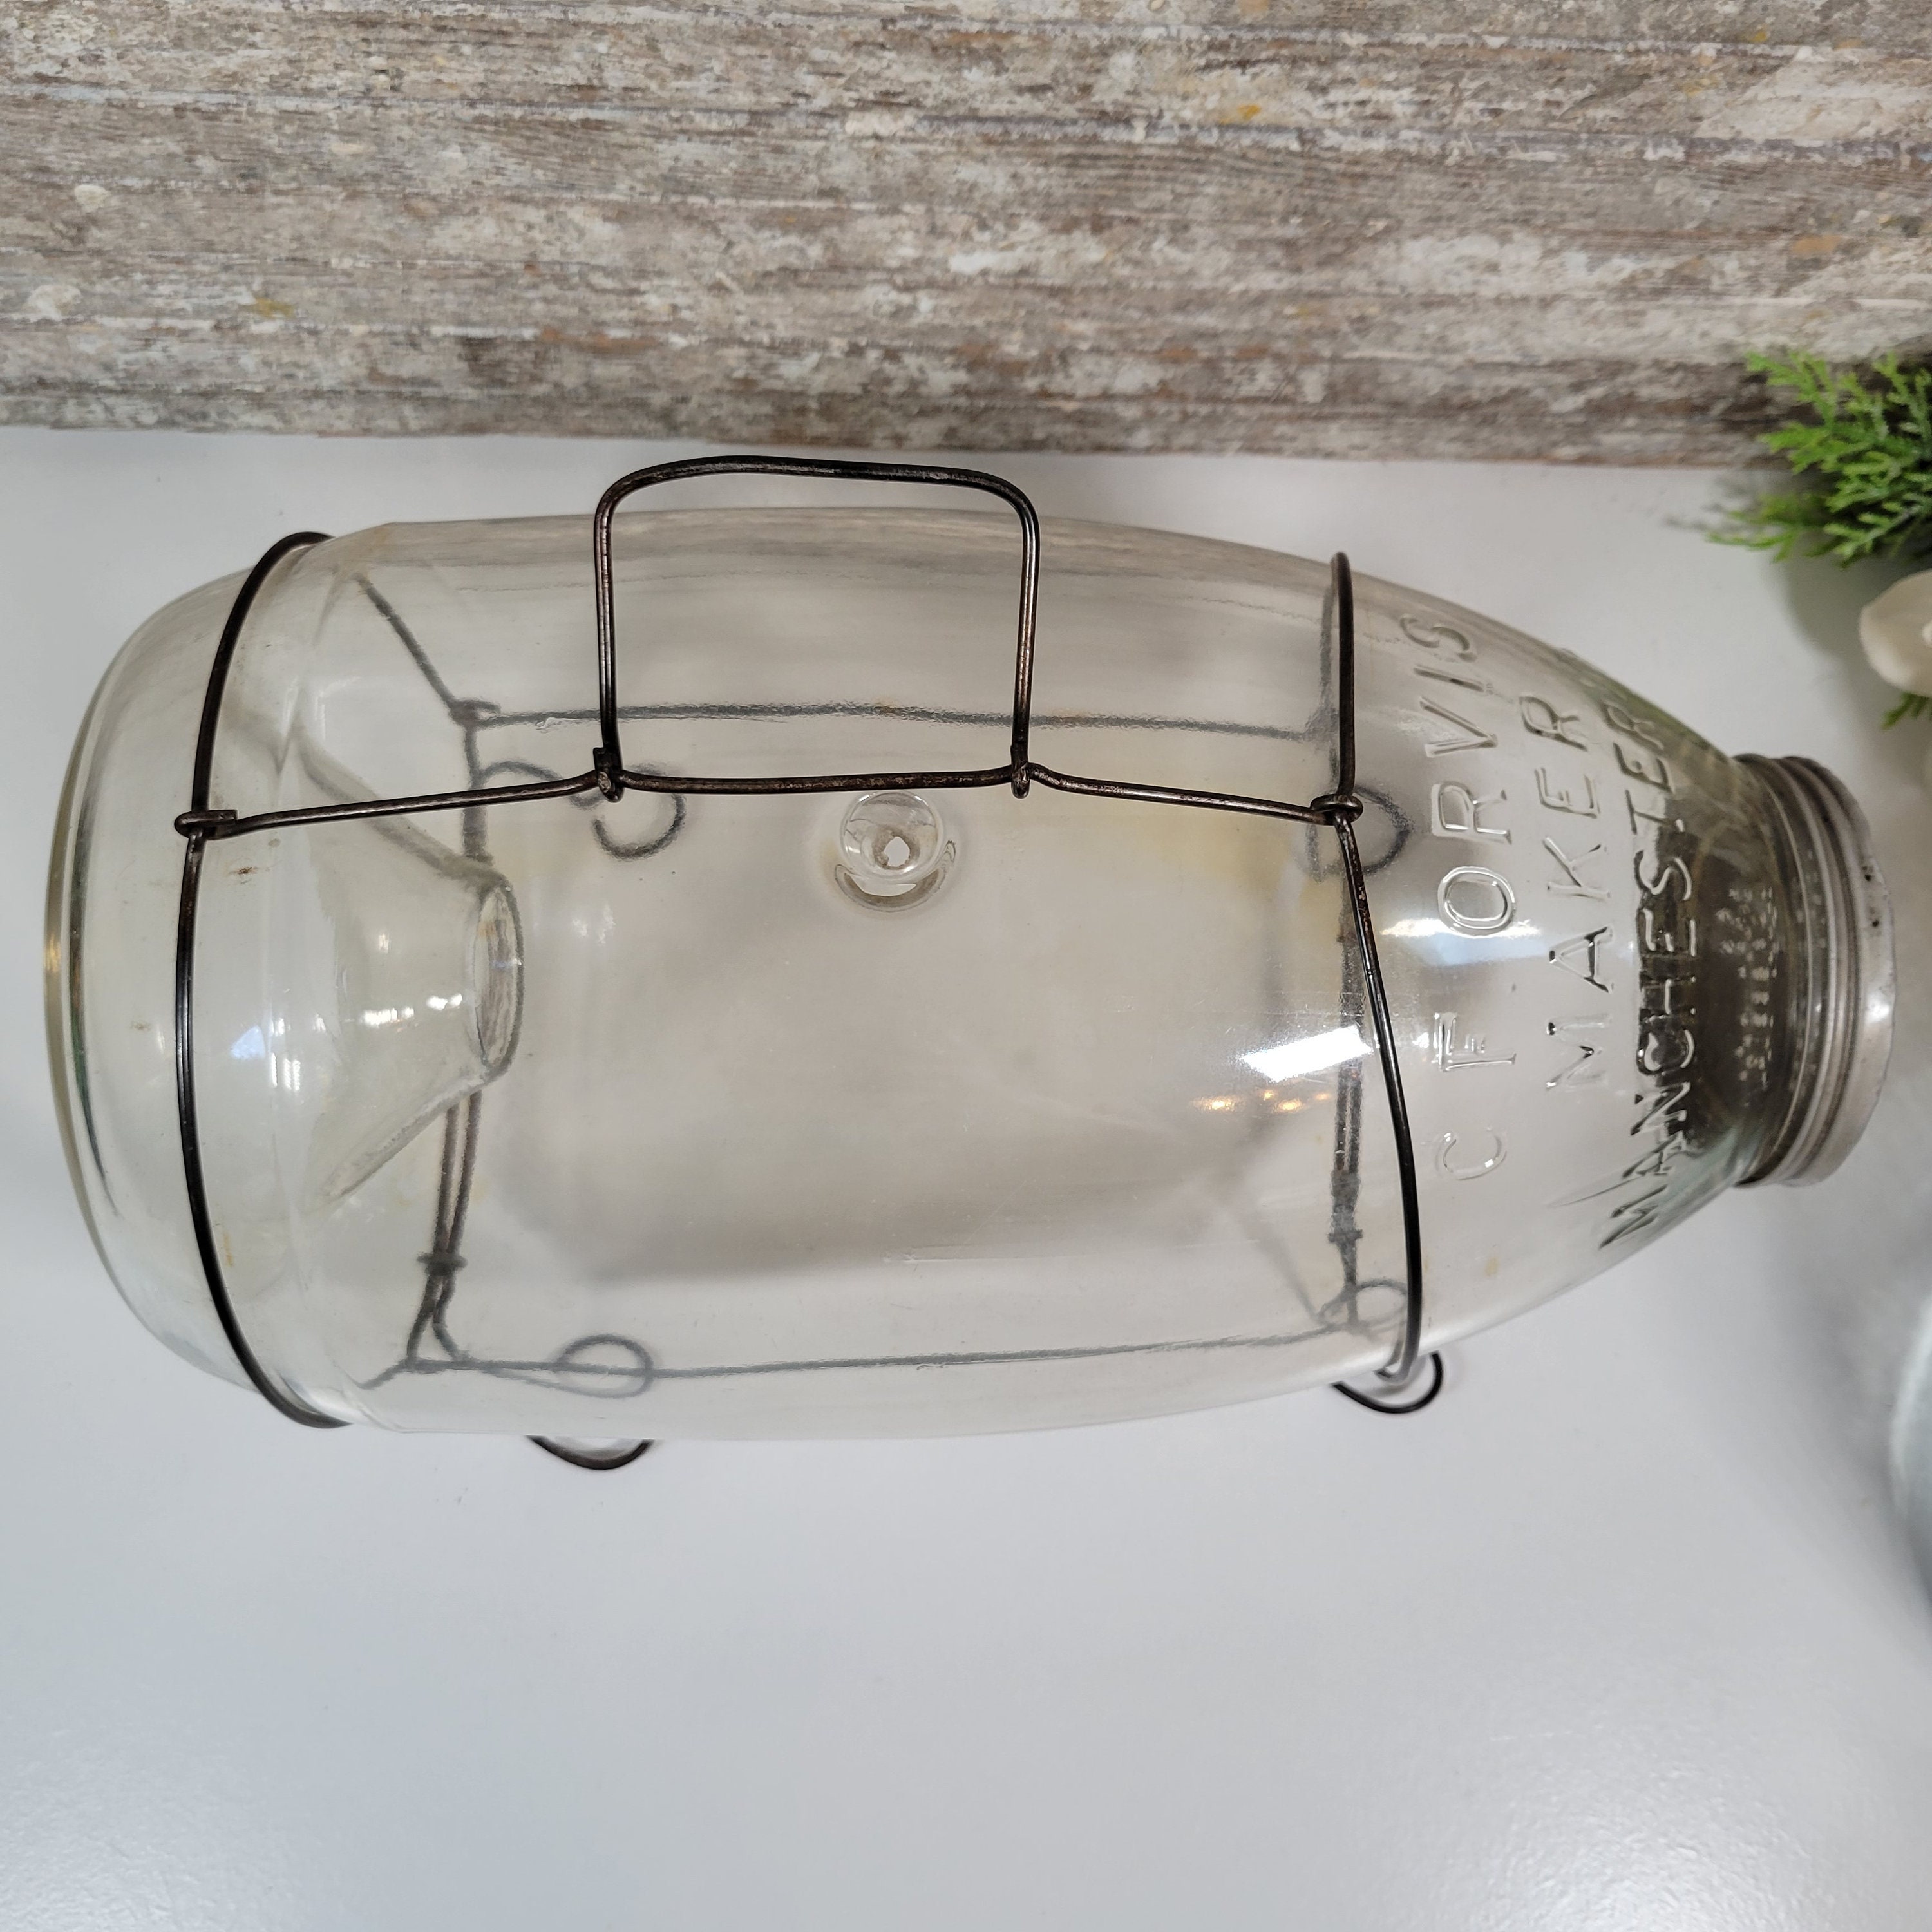 Vintage Orvis Minnow Trap, C.F. Orvis Maker Manchester VT, Glass With Wire  Holder -  Finland